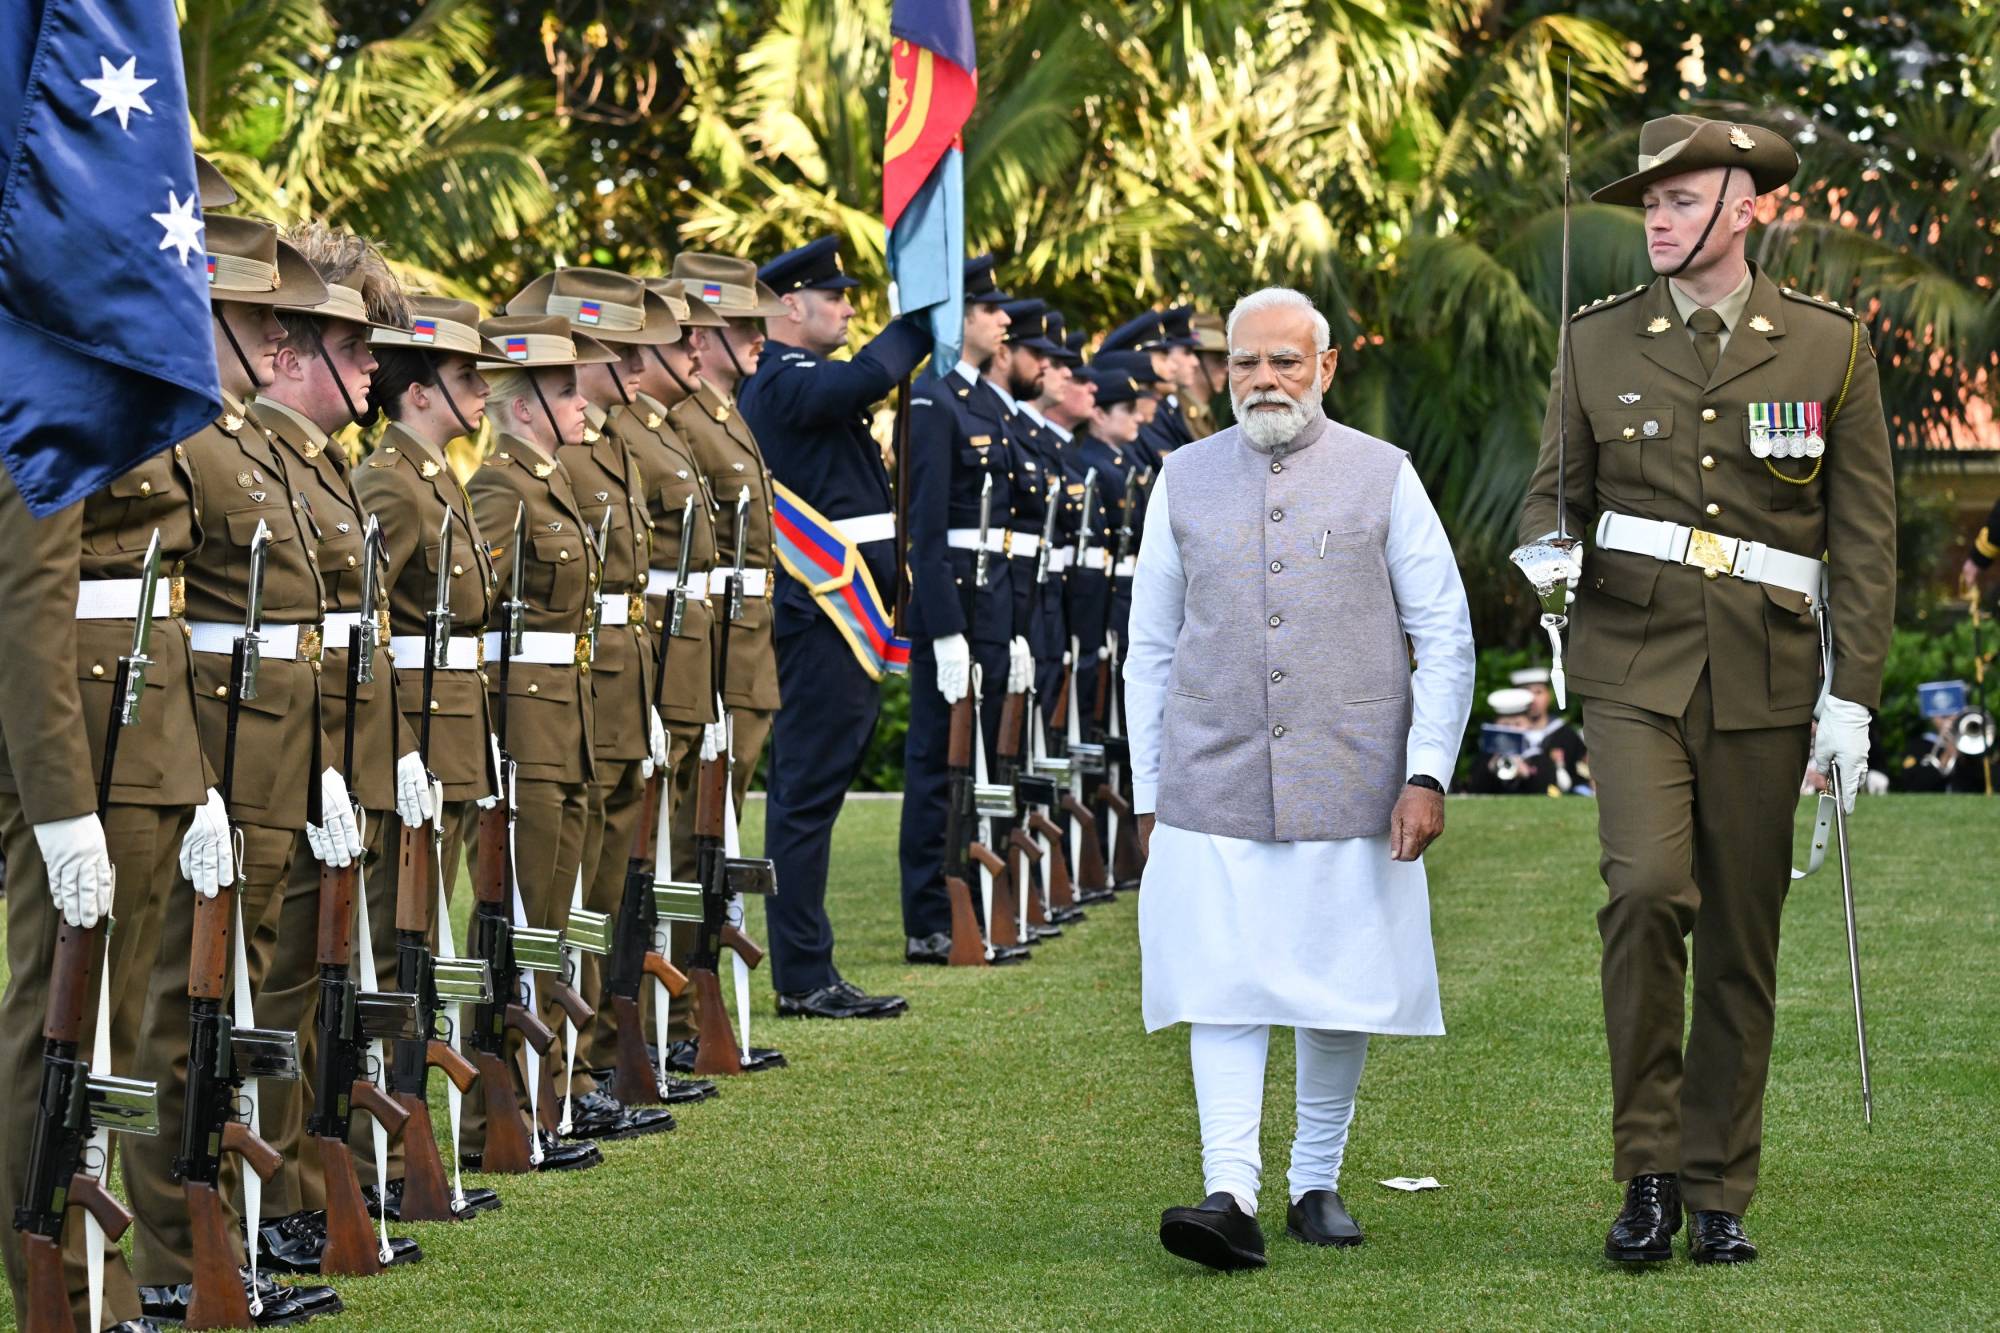 India's Prime Minister Narendra Modi (second from right) inspects the guard of honor during a ceremonial welcome ahead of a bilateral meeting with Australian Prime Minister Anthony Albanese at Admiralty House in Sydney on Wednesday. | AFP-JIJI